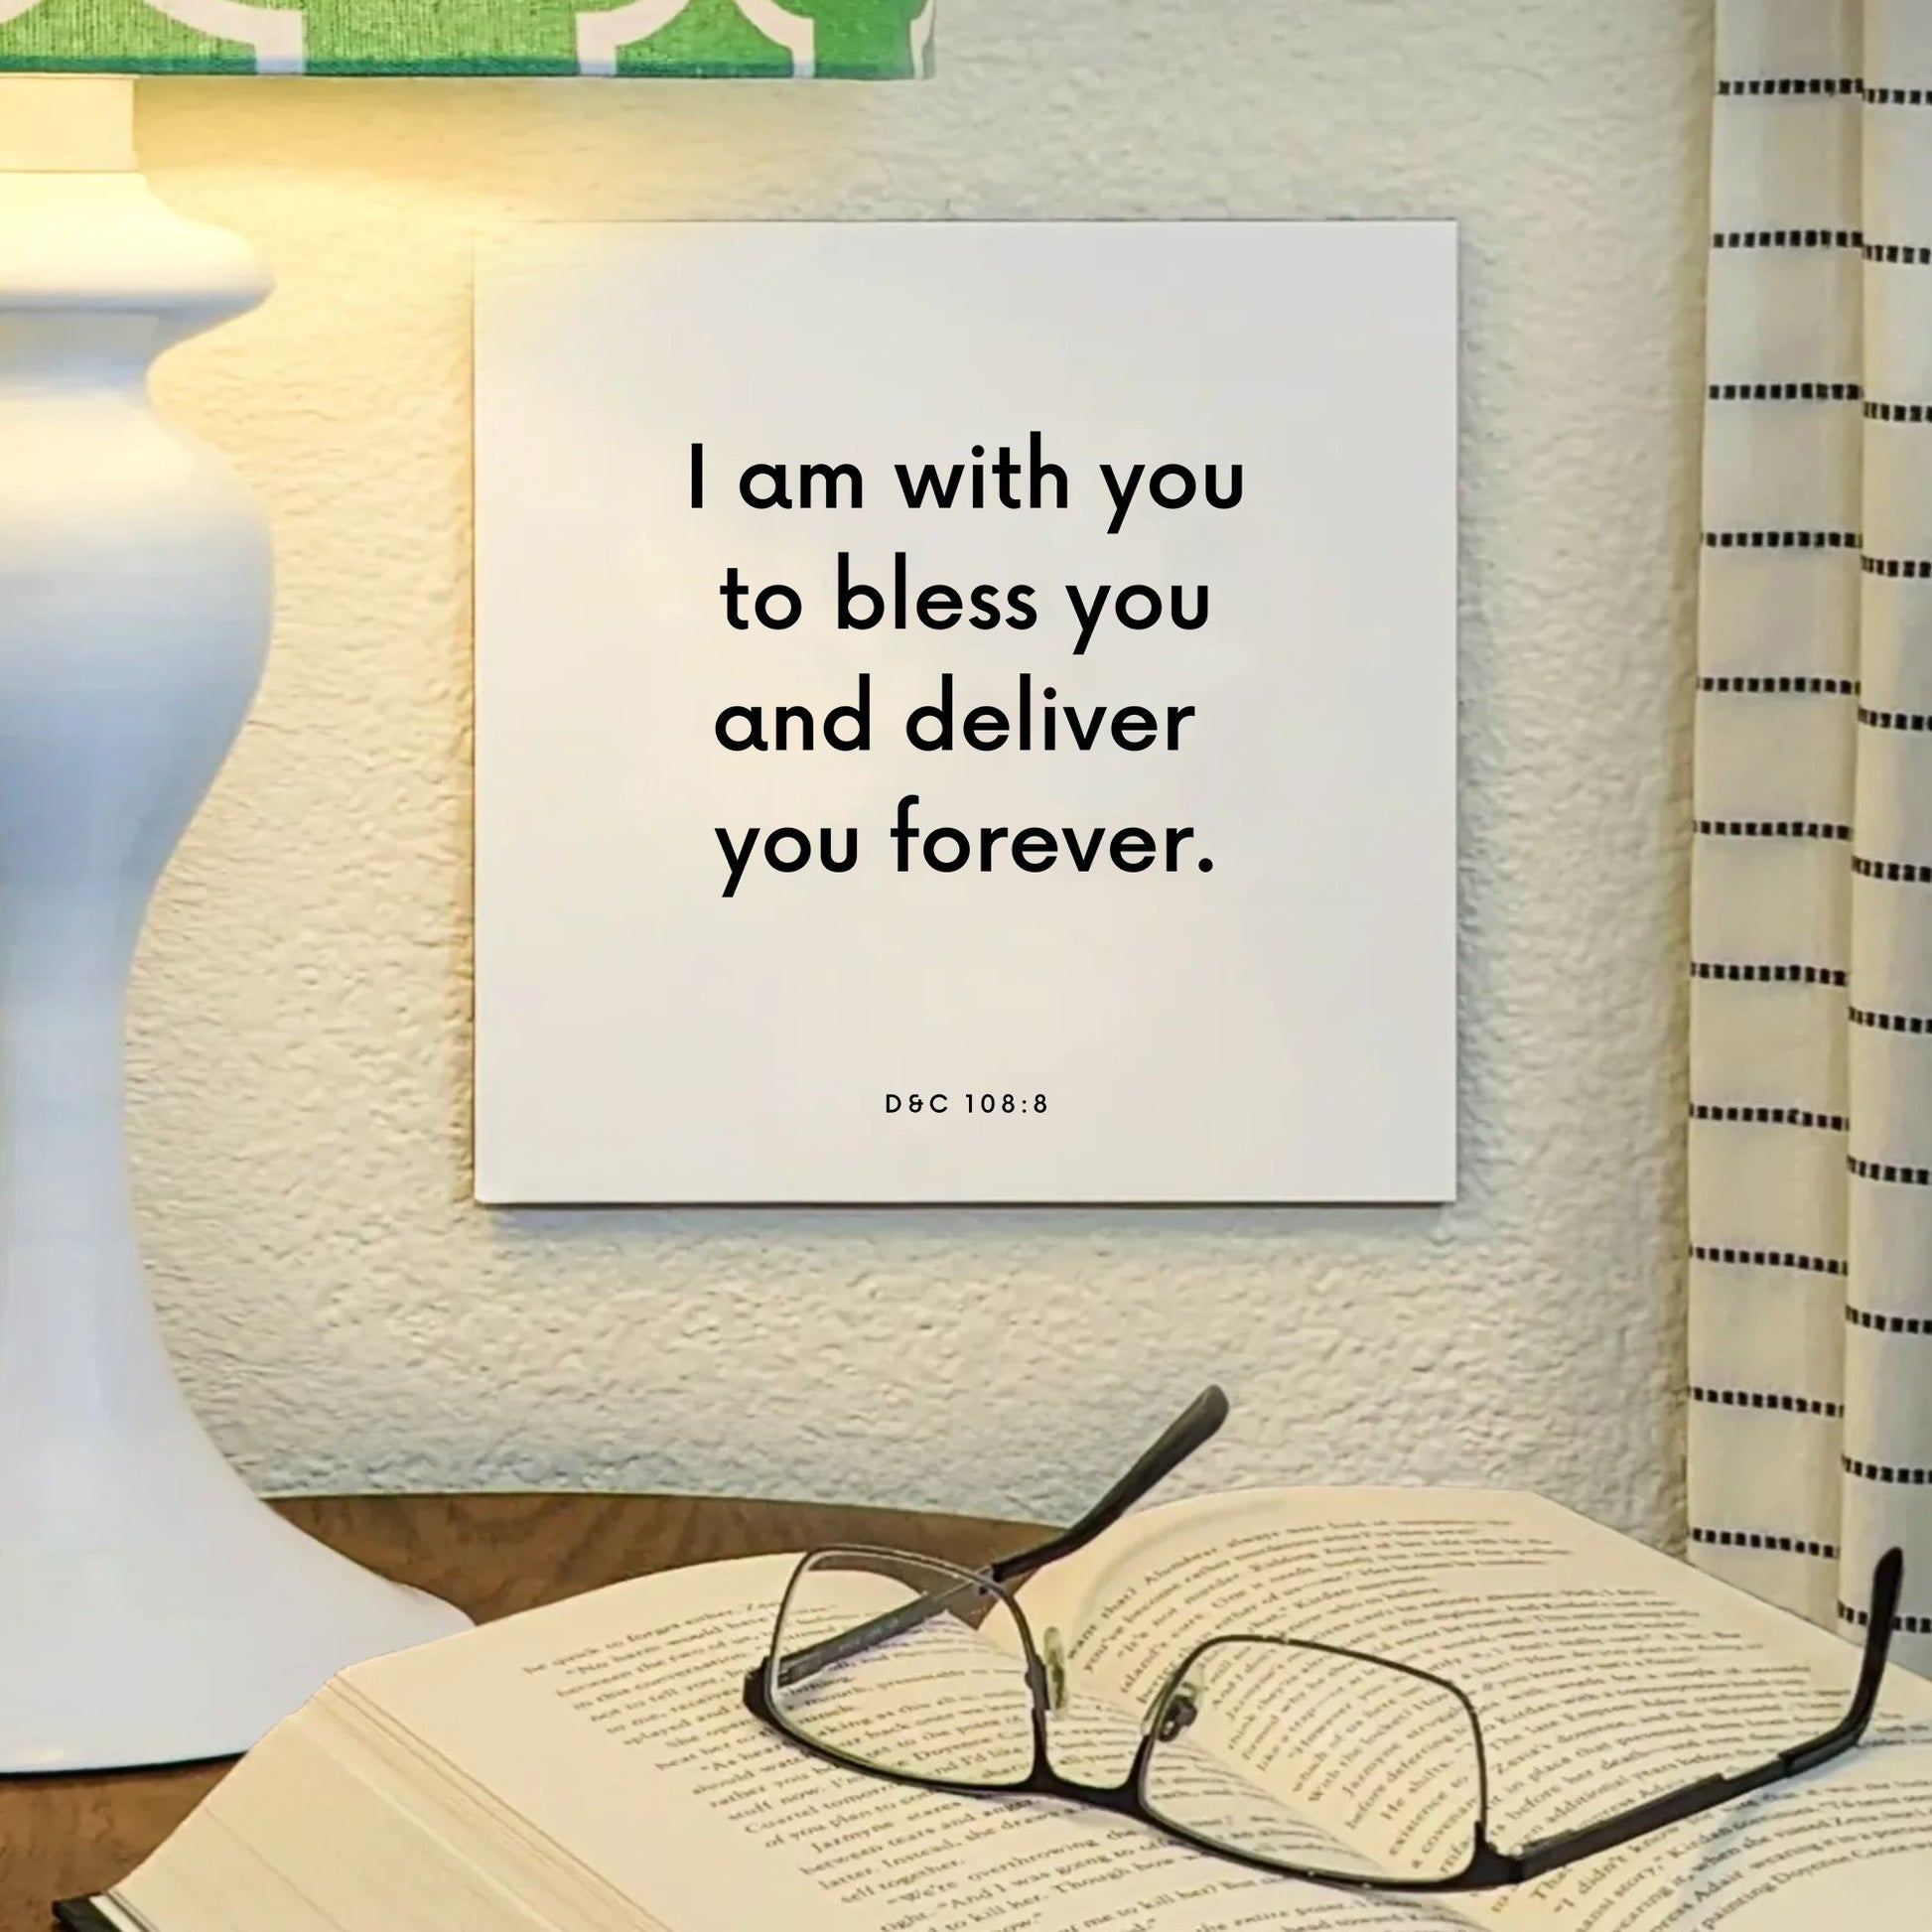 Lamp mouting of the scripture tile for D&C 108:8 - "I am with you to bless you and deliver you forever"